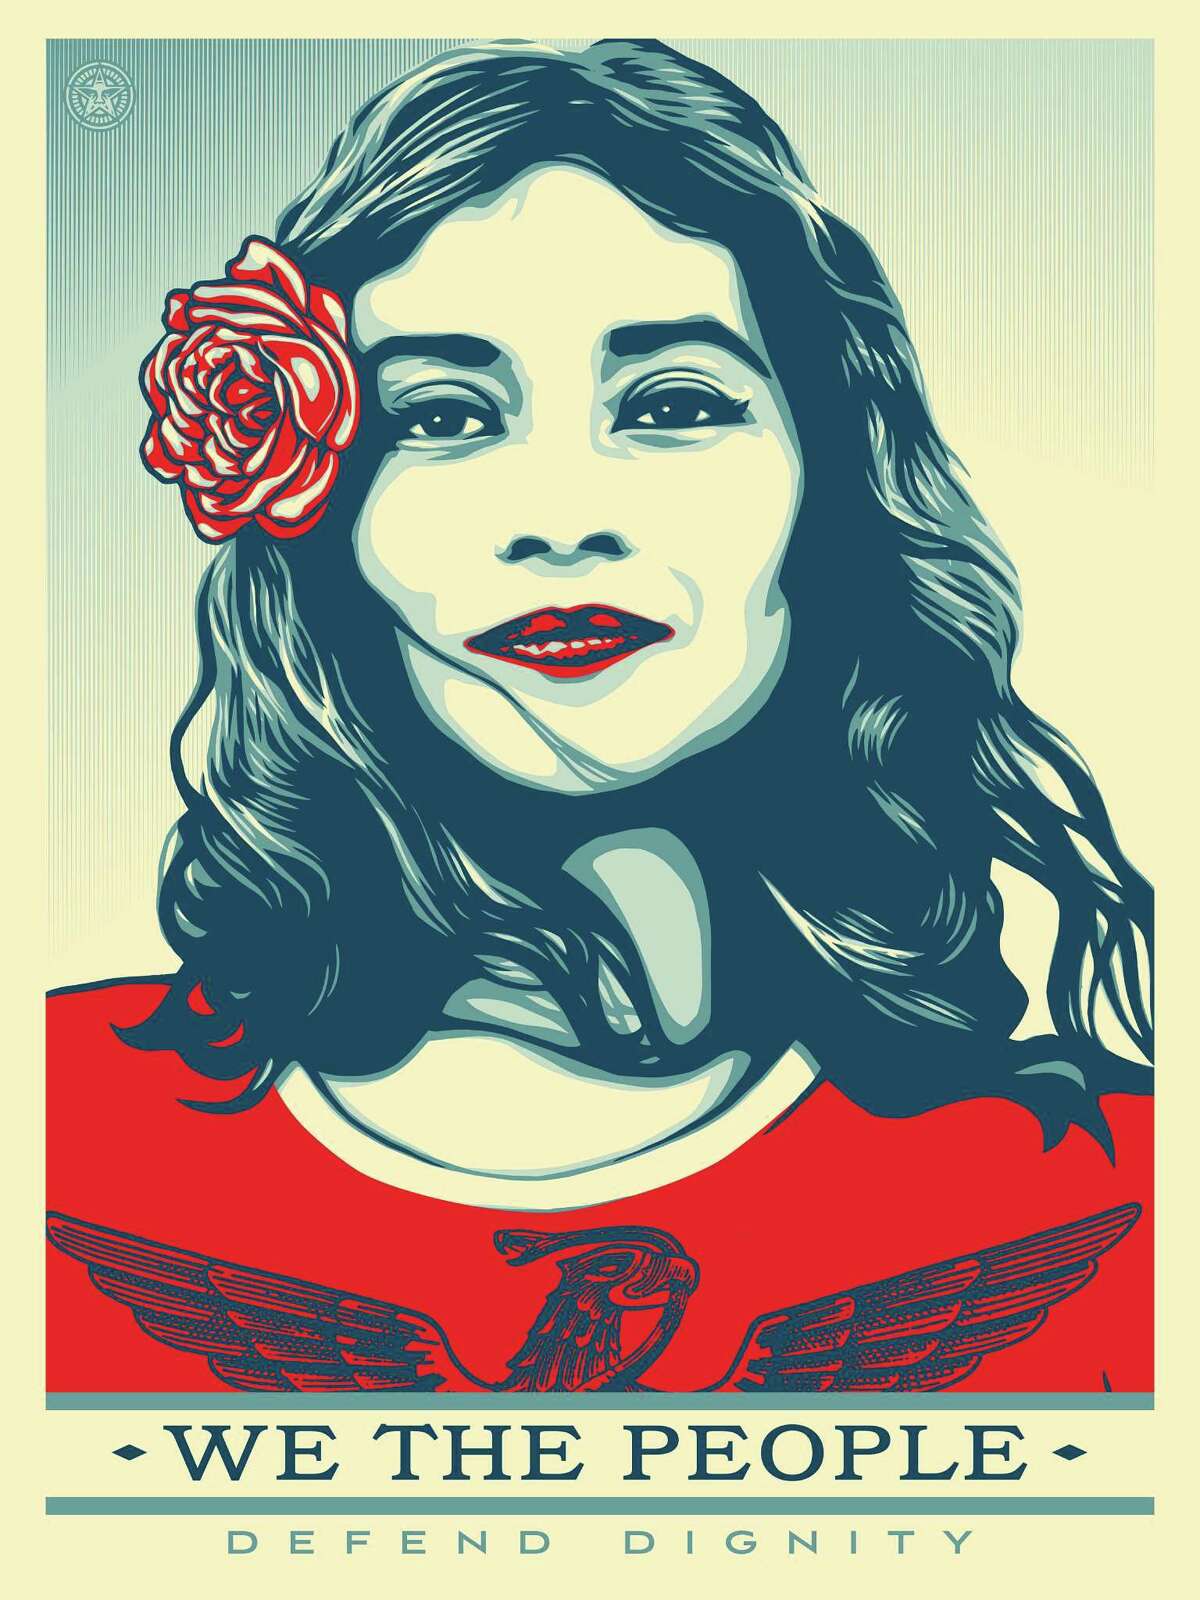 "We the People Defend Dignity," one of three images created by Shepard Fairey for the We the People campaign, is based on a portrait by San Antonio-based photographer Arlene Mejorado.